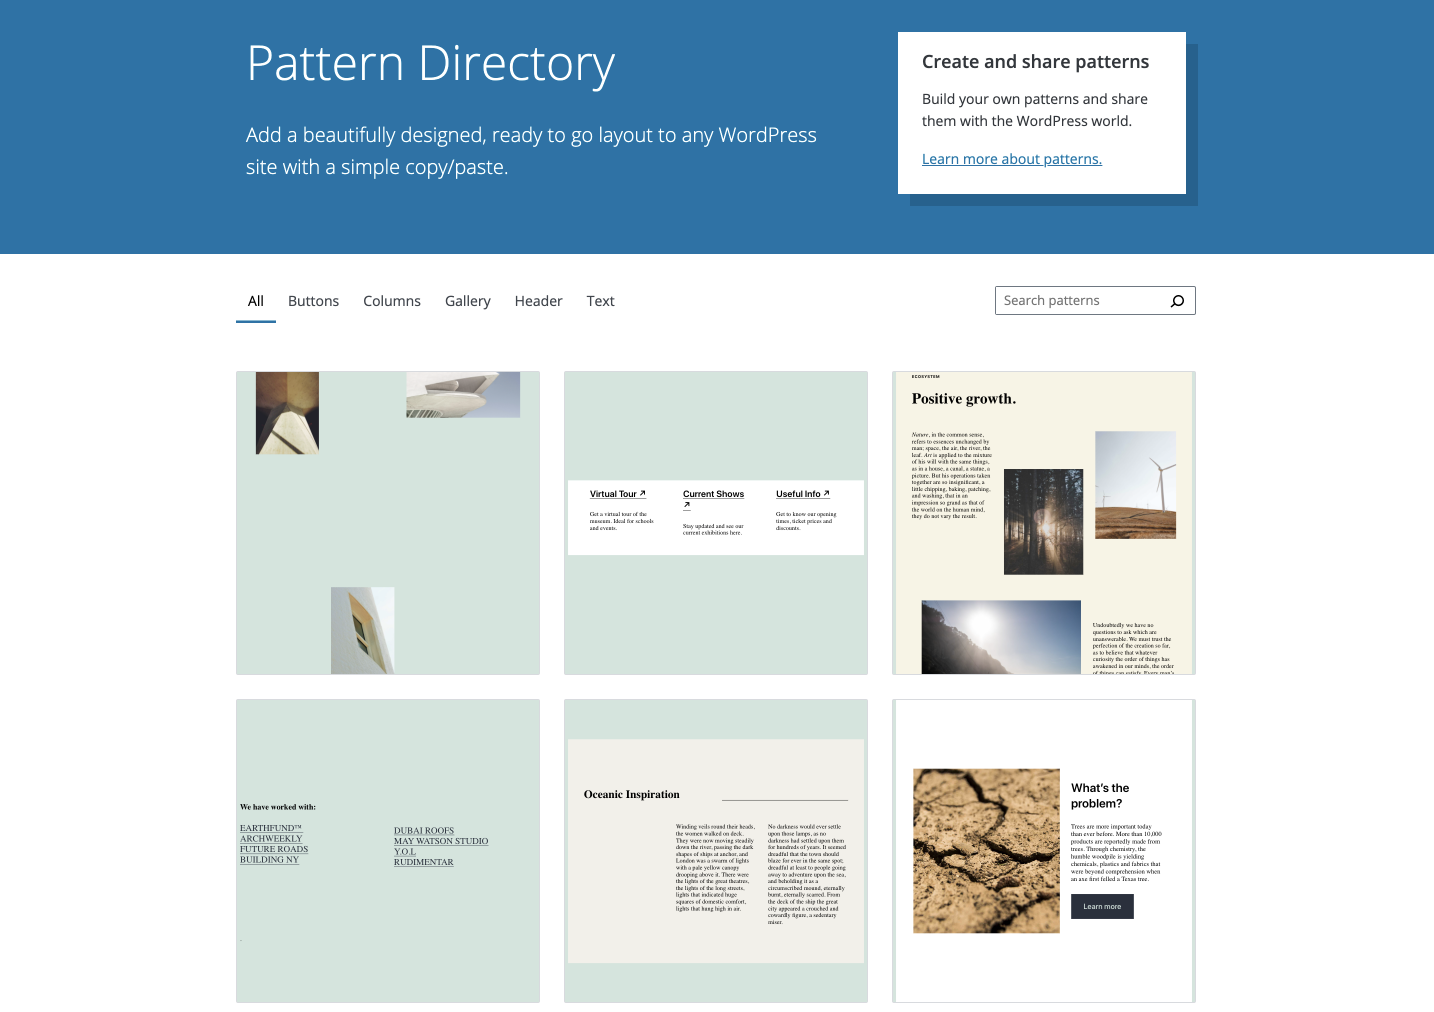 Pattern Directory Targeted to Launch with WordPress 5.8